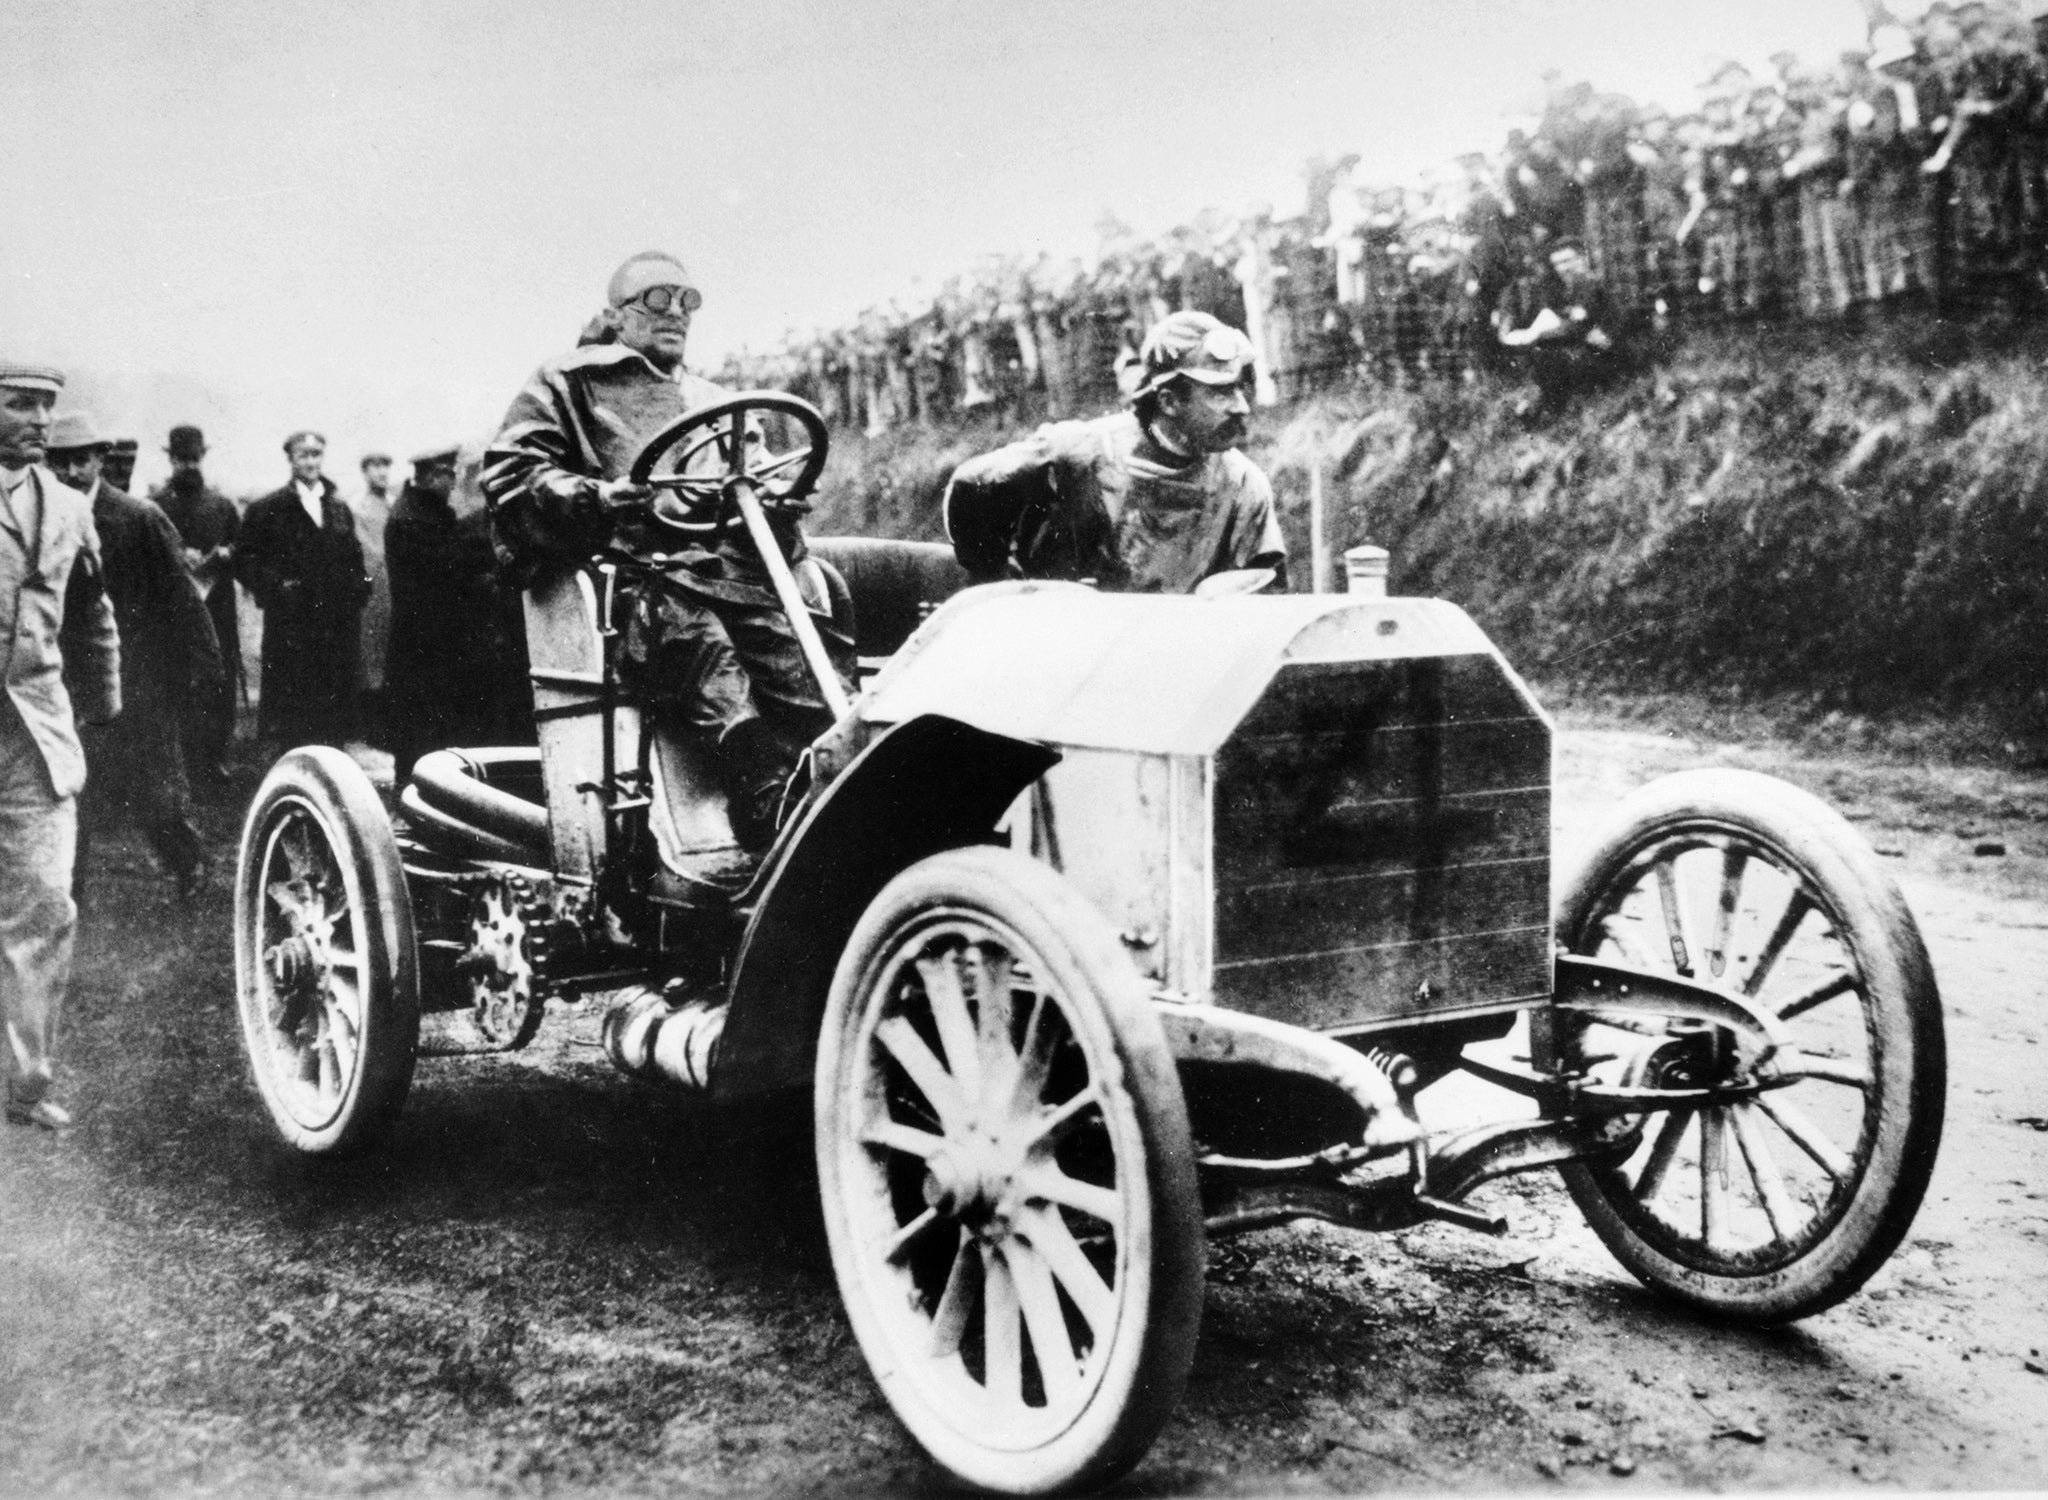 Camille Jenatzy in his 60 hp Mercedes, winner of the Gordon Bennett Race, Athy, Ireland, 1903. This car was one of the fastest of its day, being capable of 75 mph. The Gordon Bennett Races held in the early 1900s were a forerunner of modern Grand Prix racing. (Photo by National Motor Museum/Heritage Images/Getty Images)